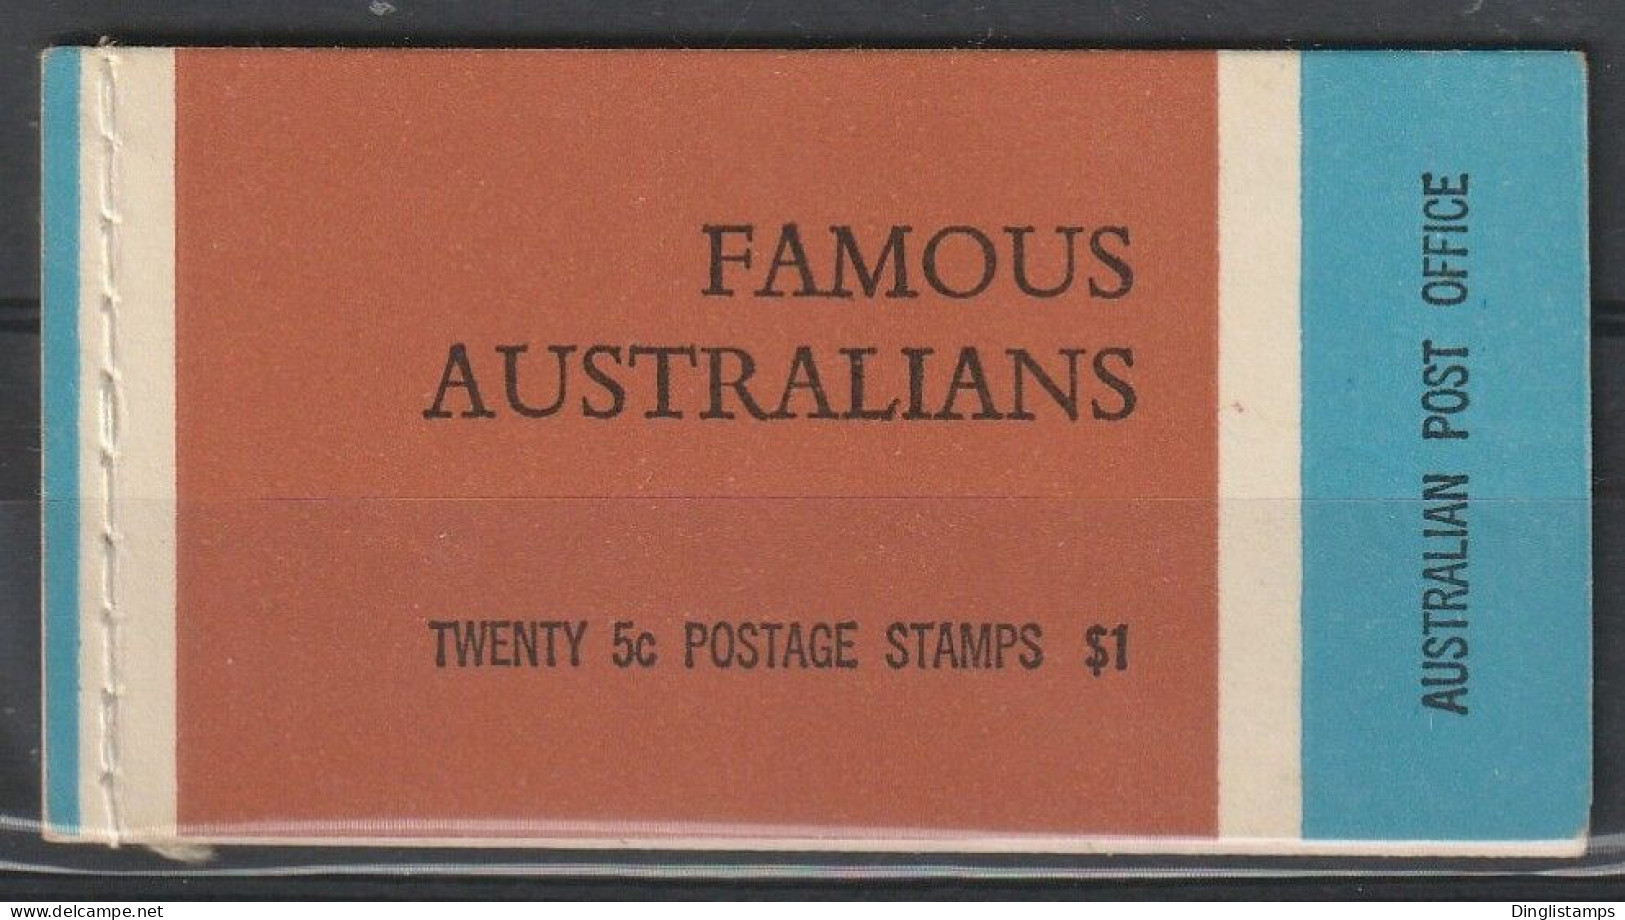 AUSTRALIA - 1968, Famous Persons Booklet With 5x4v - Carnets